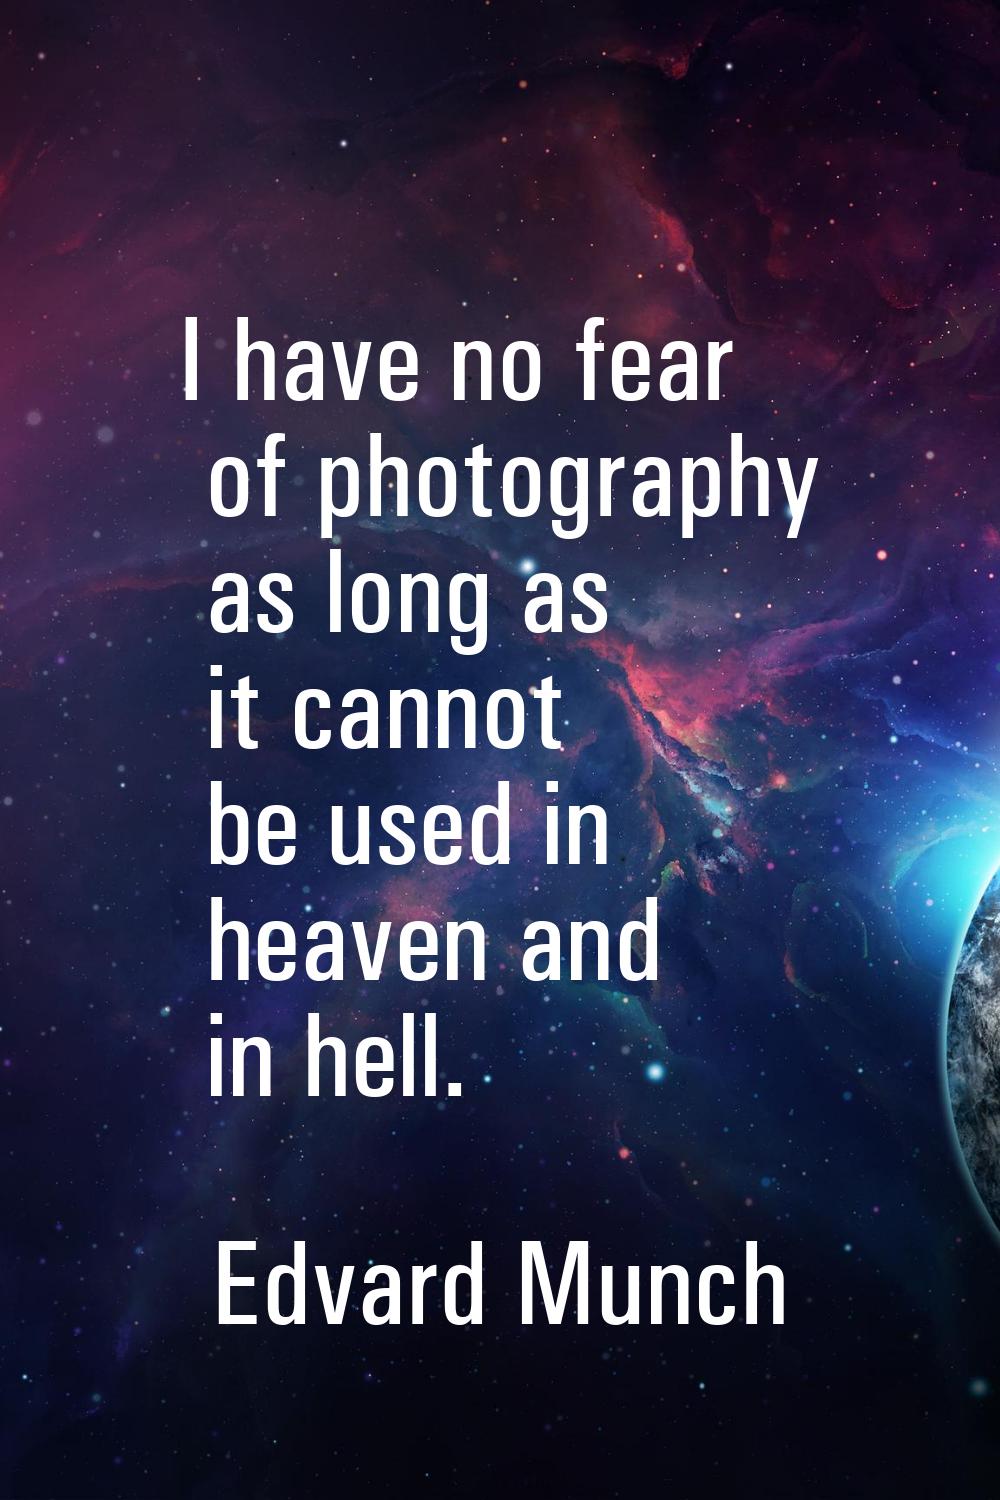 I have no fear of photography as long as it cannot be used in heaven and in hell.